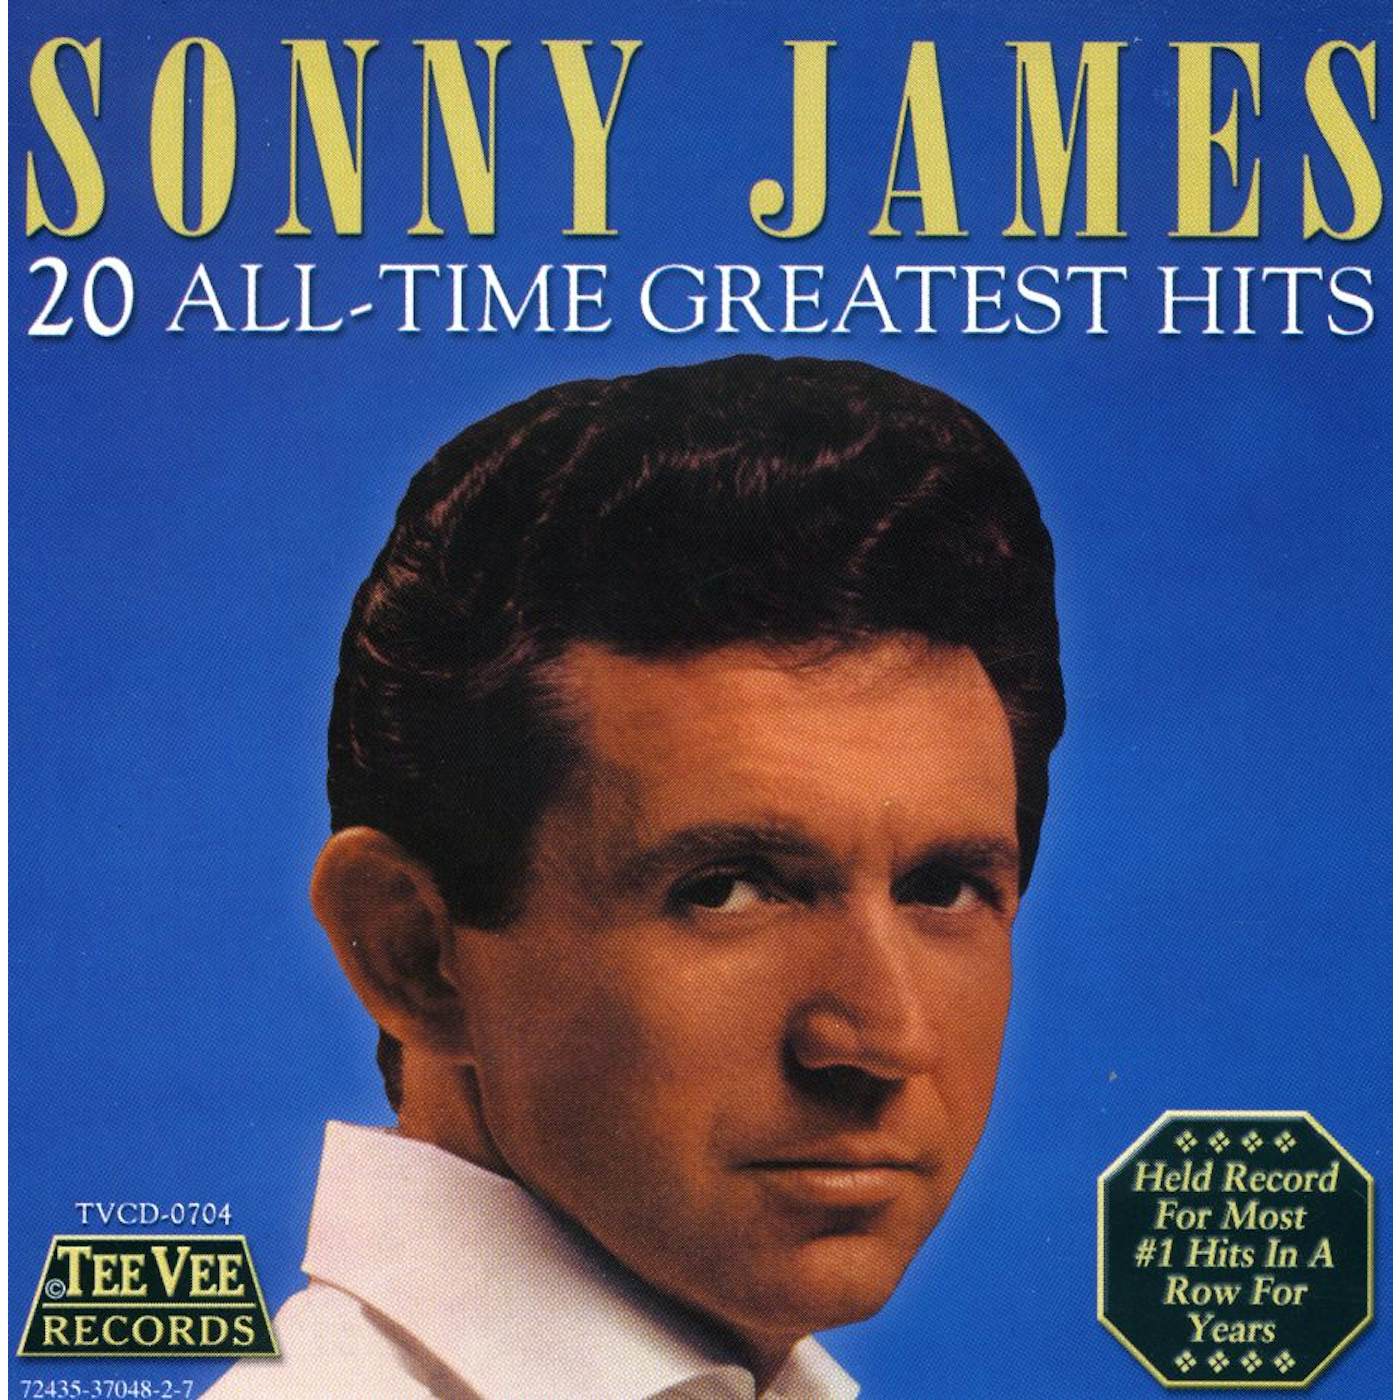 Sonny James 20 ALL TIME GREATEST HITS CD